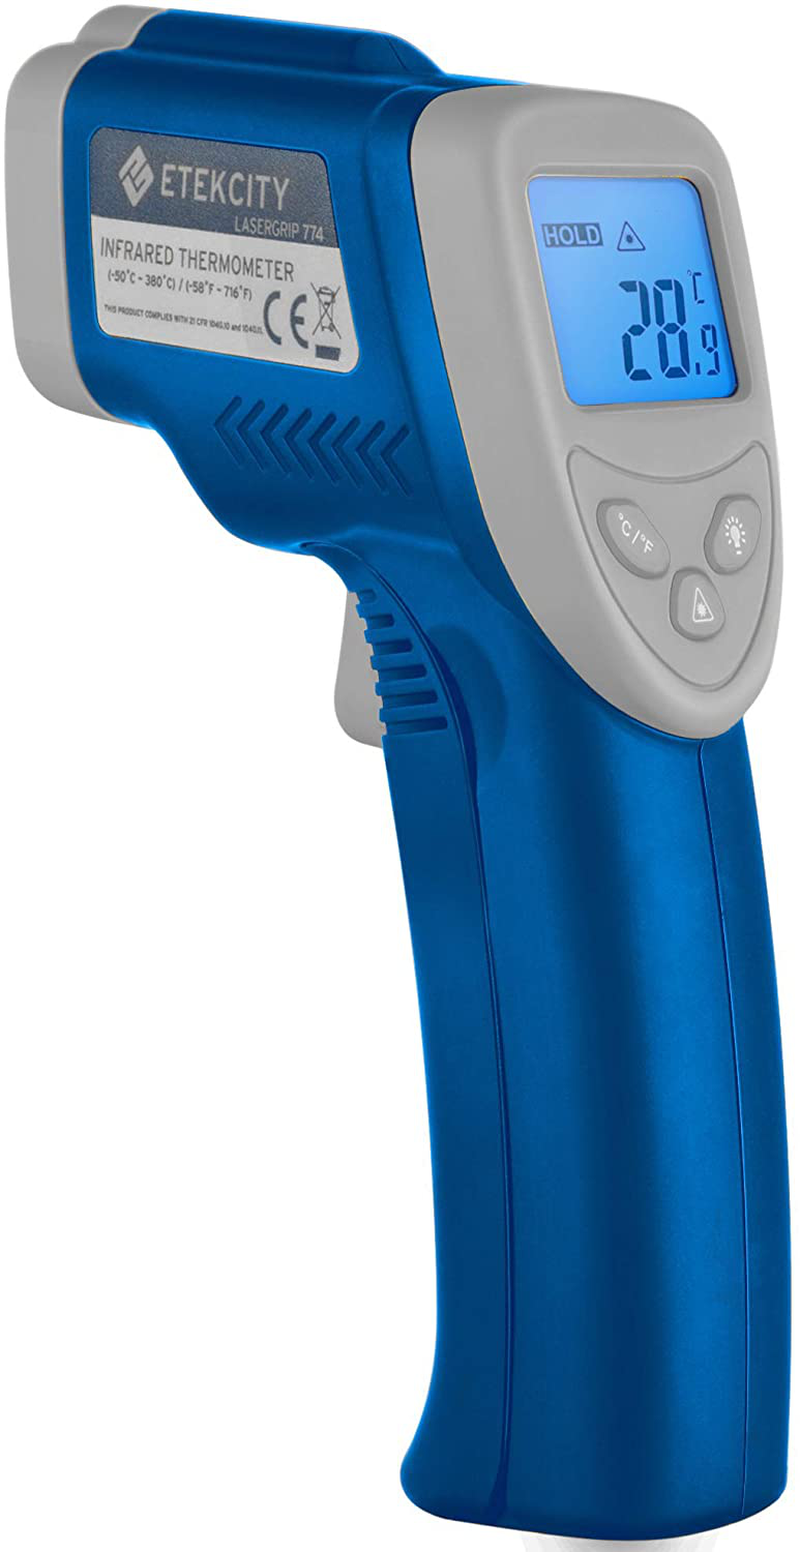 810043371575 Etekcity Infrared Thermometer 774 (Not for Human) Temperature  Gun Non-Contact Digital Laser Thermometer-58?~ 716? (-50? ~ 380?)